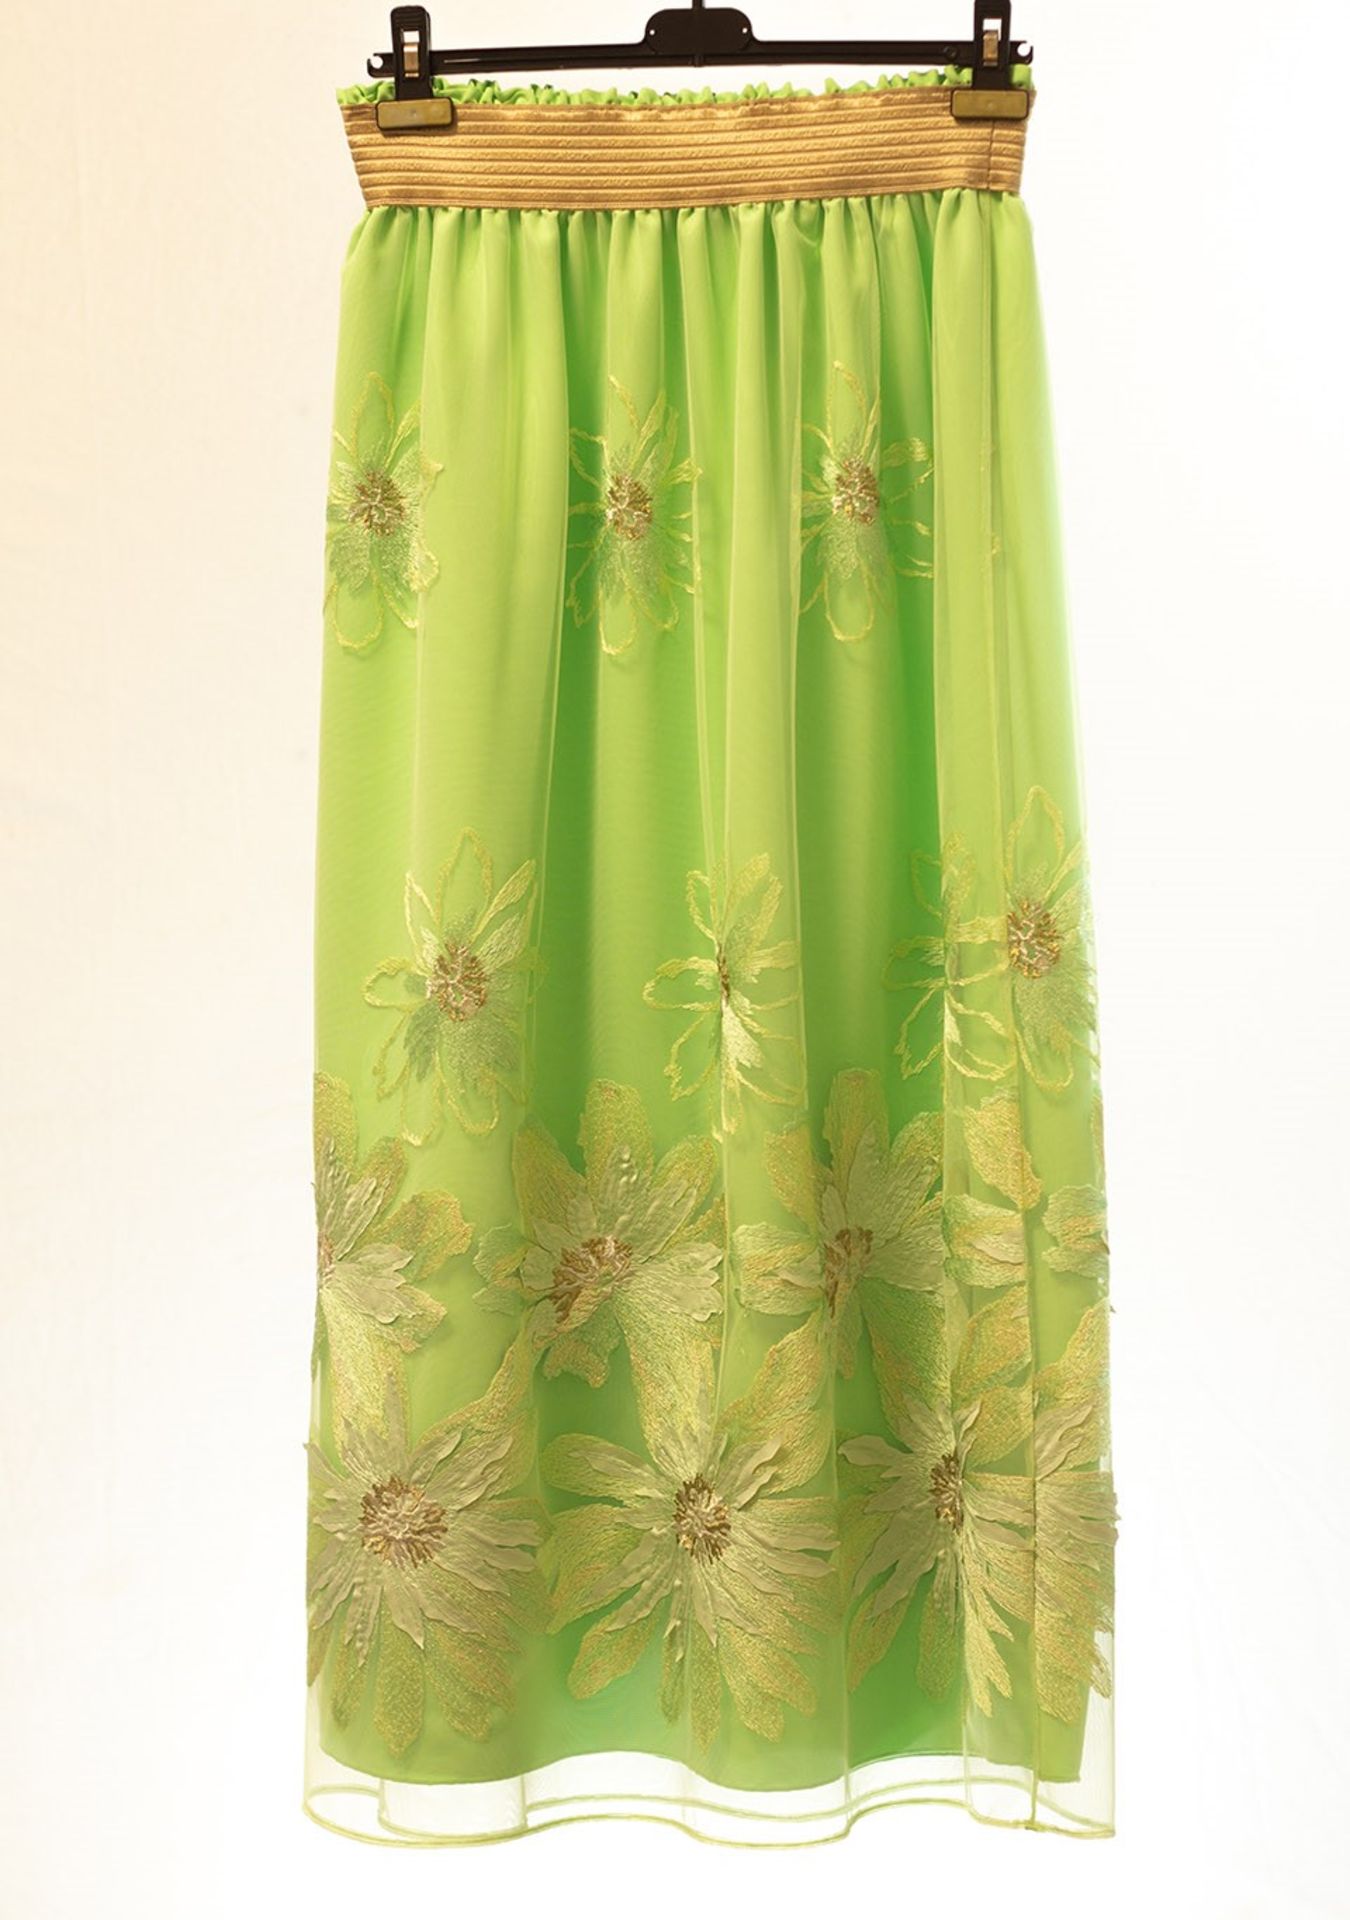 1 x Boutique Le Duc Green Skirt With Matching Scarf And Shawl - Size: 8 - Material: 100% Silk - From - Image 2 of 10